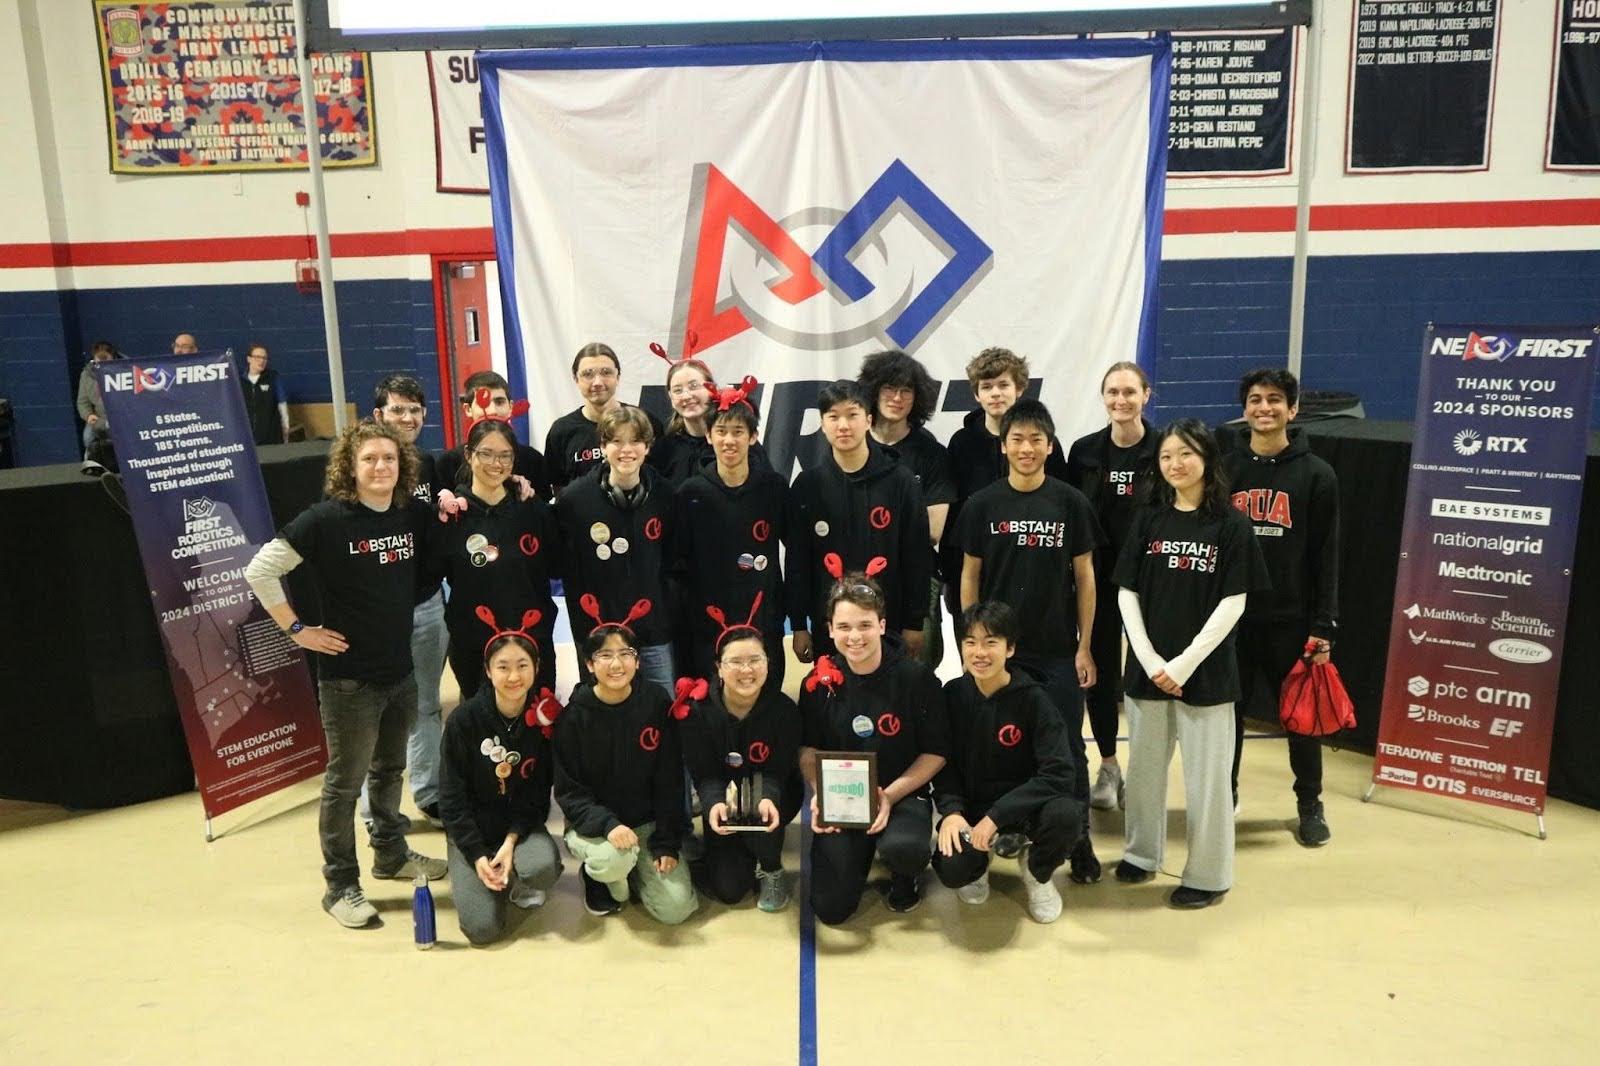 The Lobstah Bots posing for a photo after winning the Judges’ Award at our Greater Boston event.